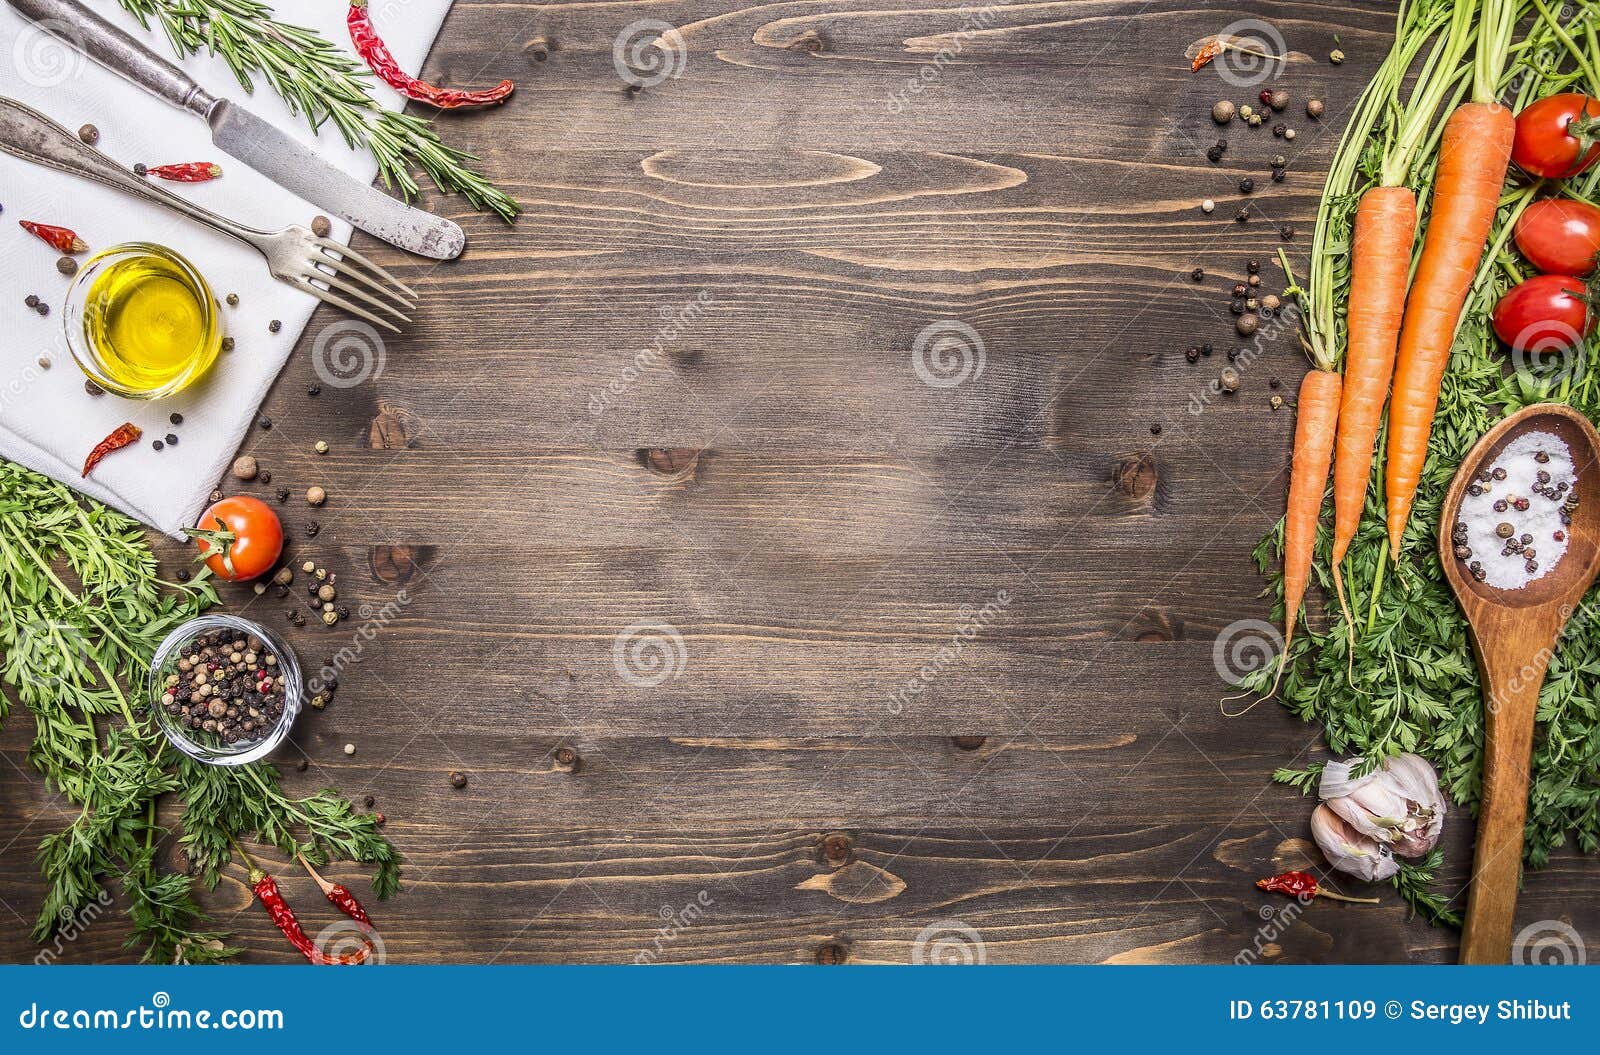 fresh organic vegetables and spoons on rustic wooden background, top view, border. healthy food or vegetarian cooking concept